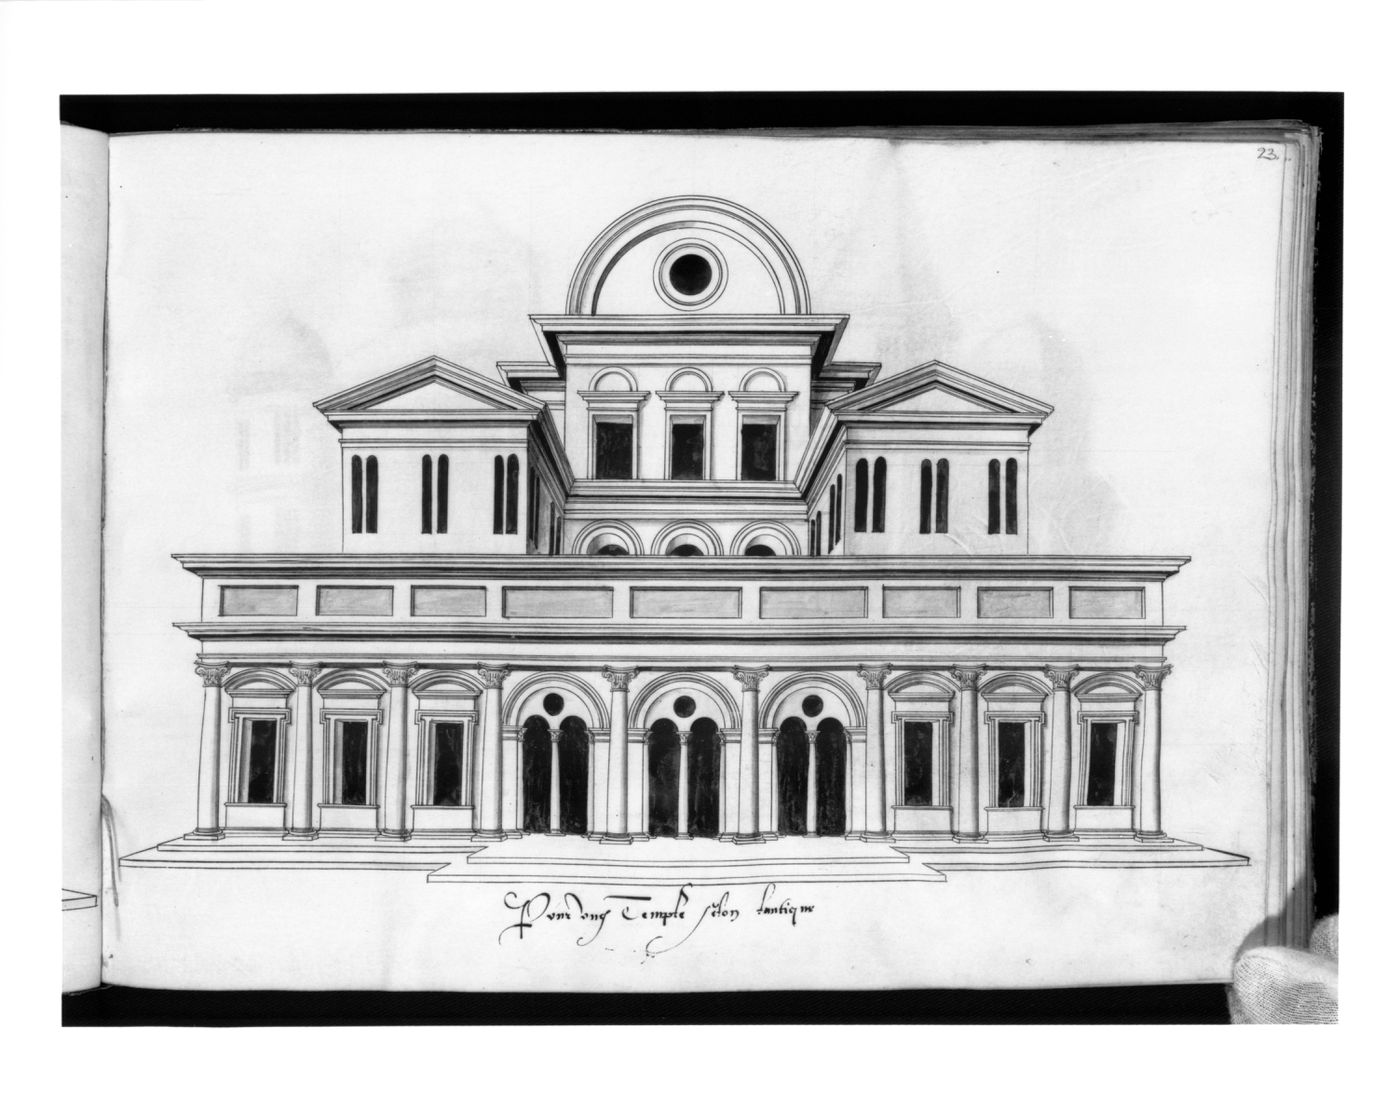 Perspectival elevation for a temple in the antique manner